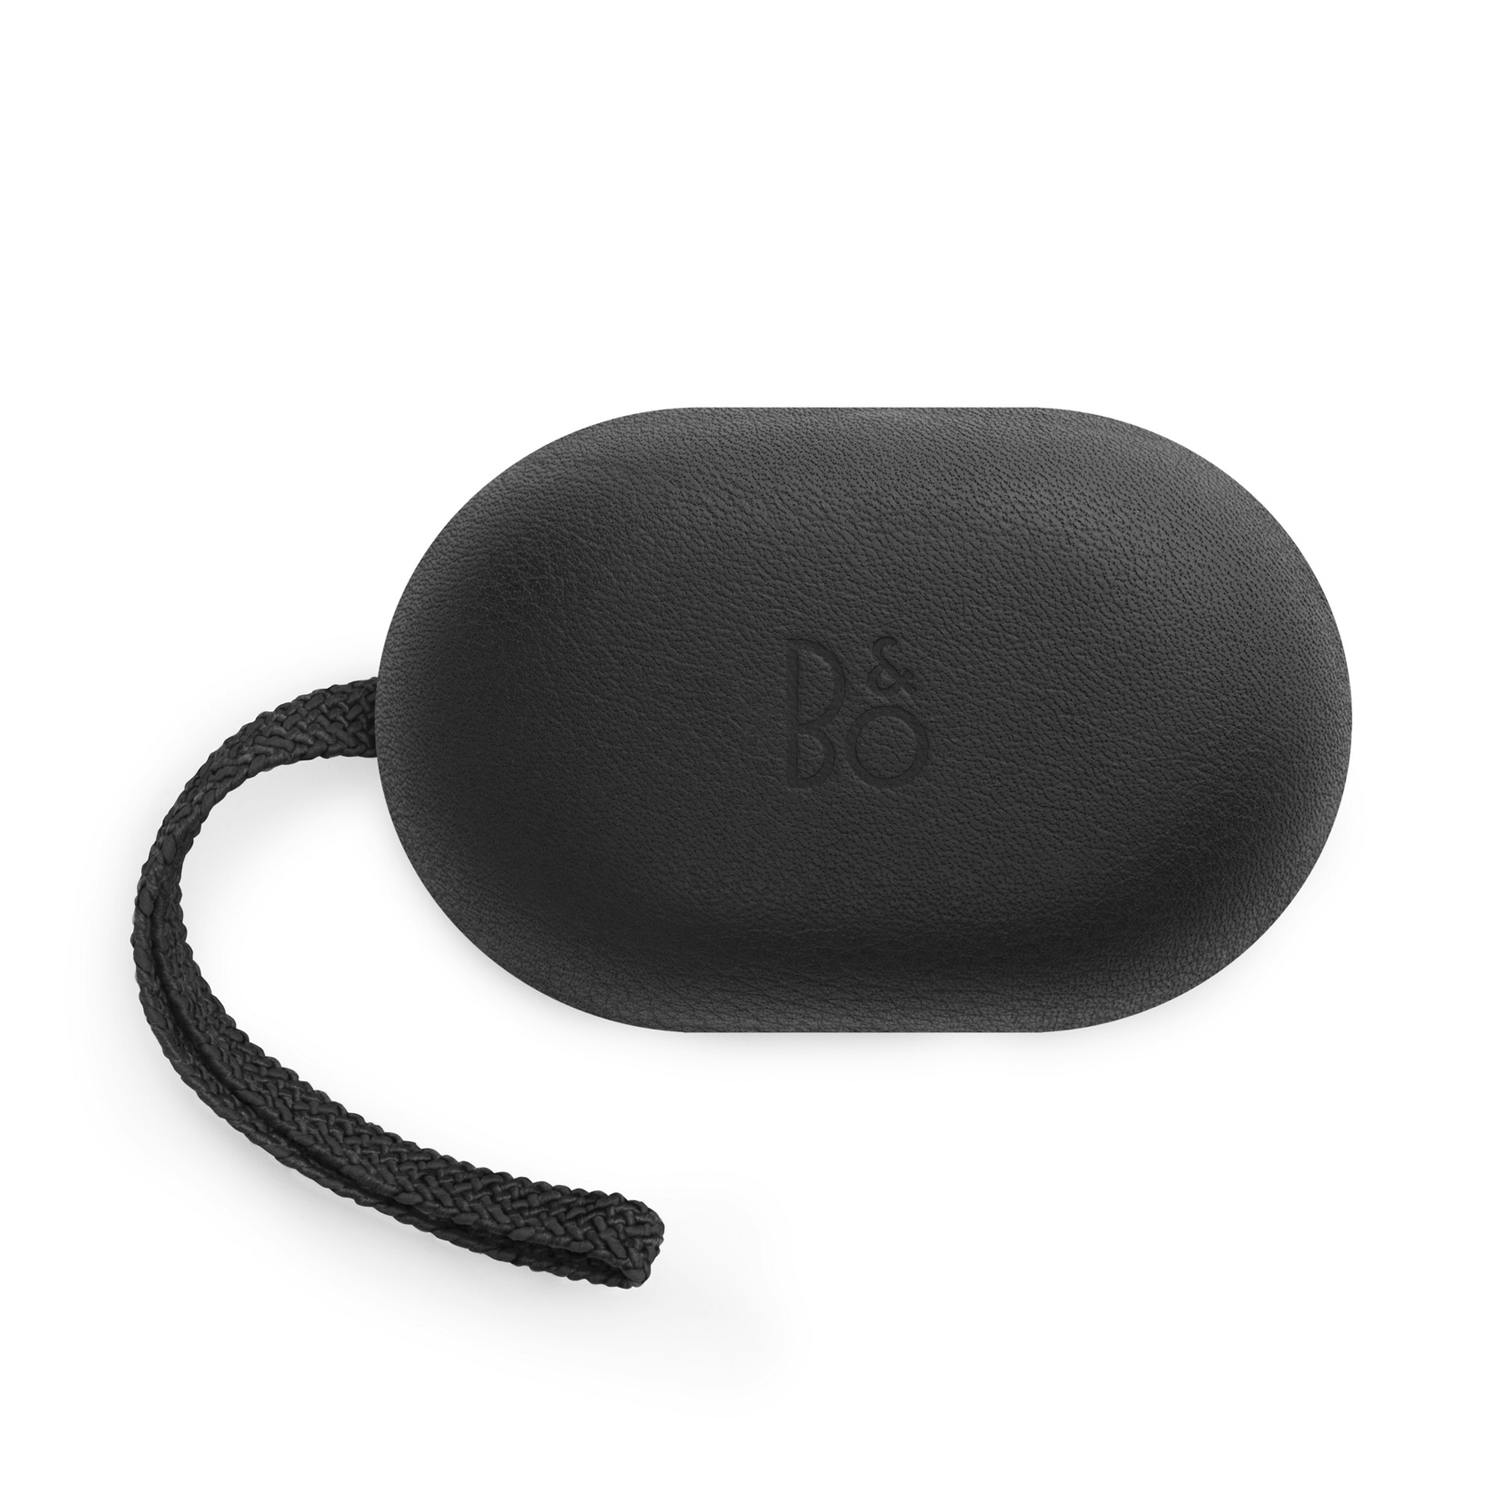 Bang & Olufsen Beoplay E8 Wireless Earbuds